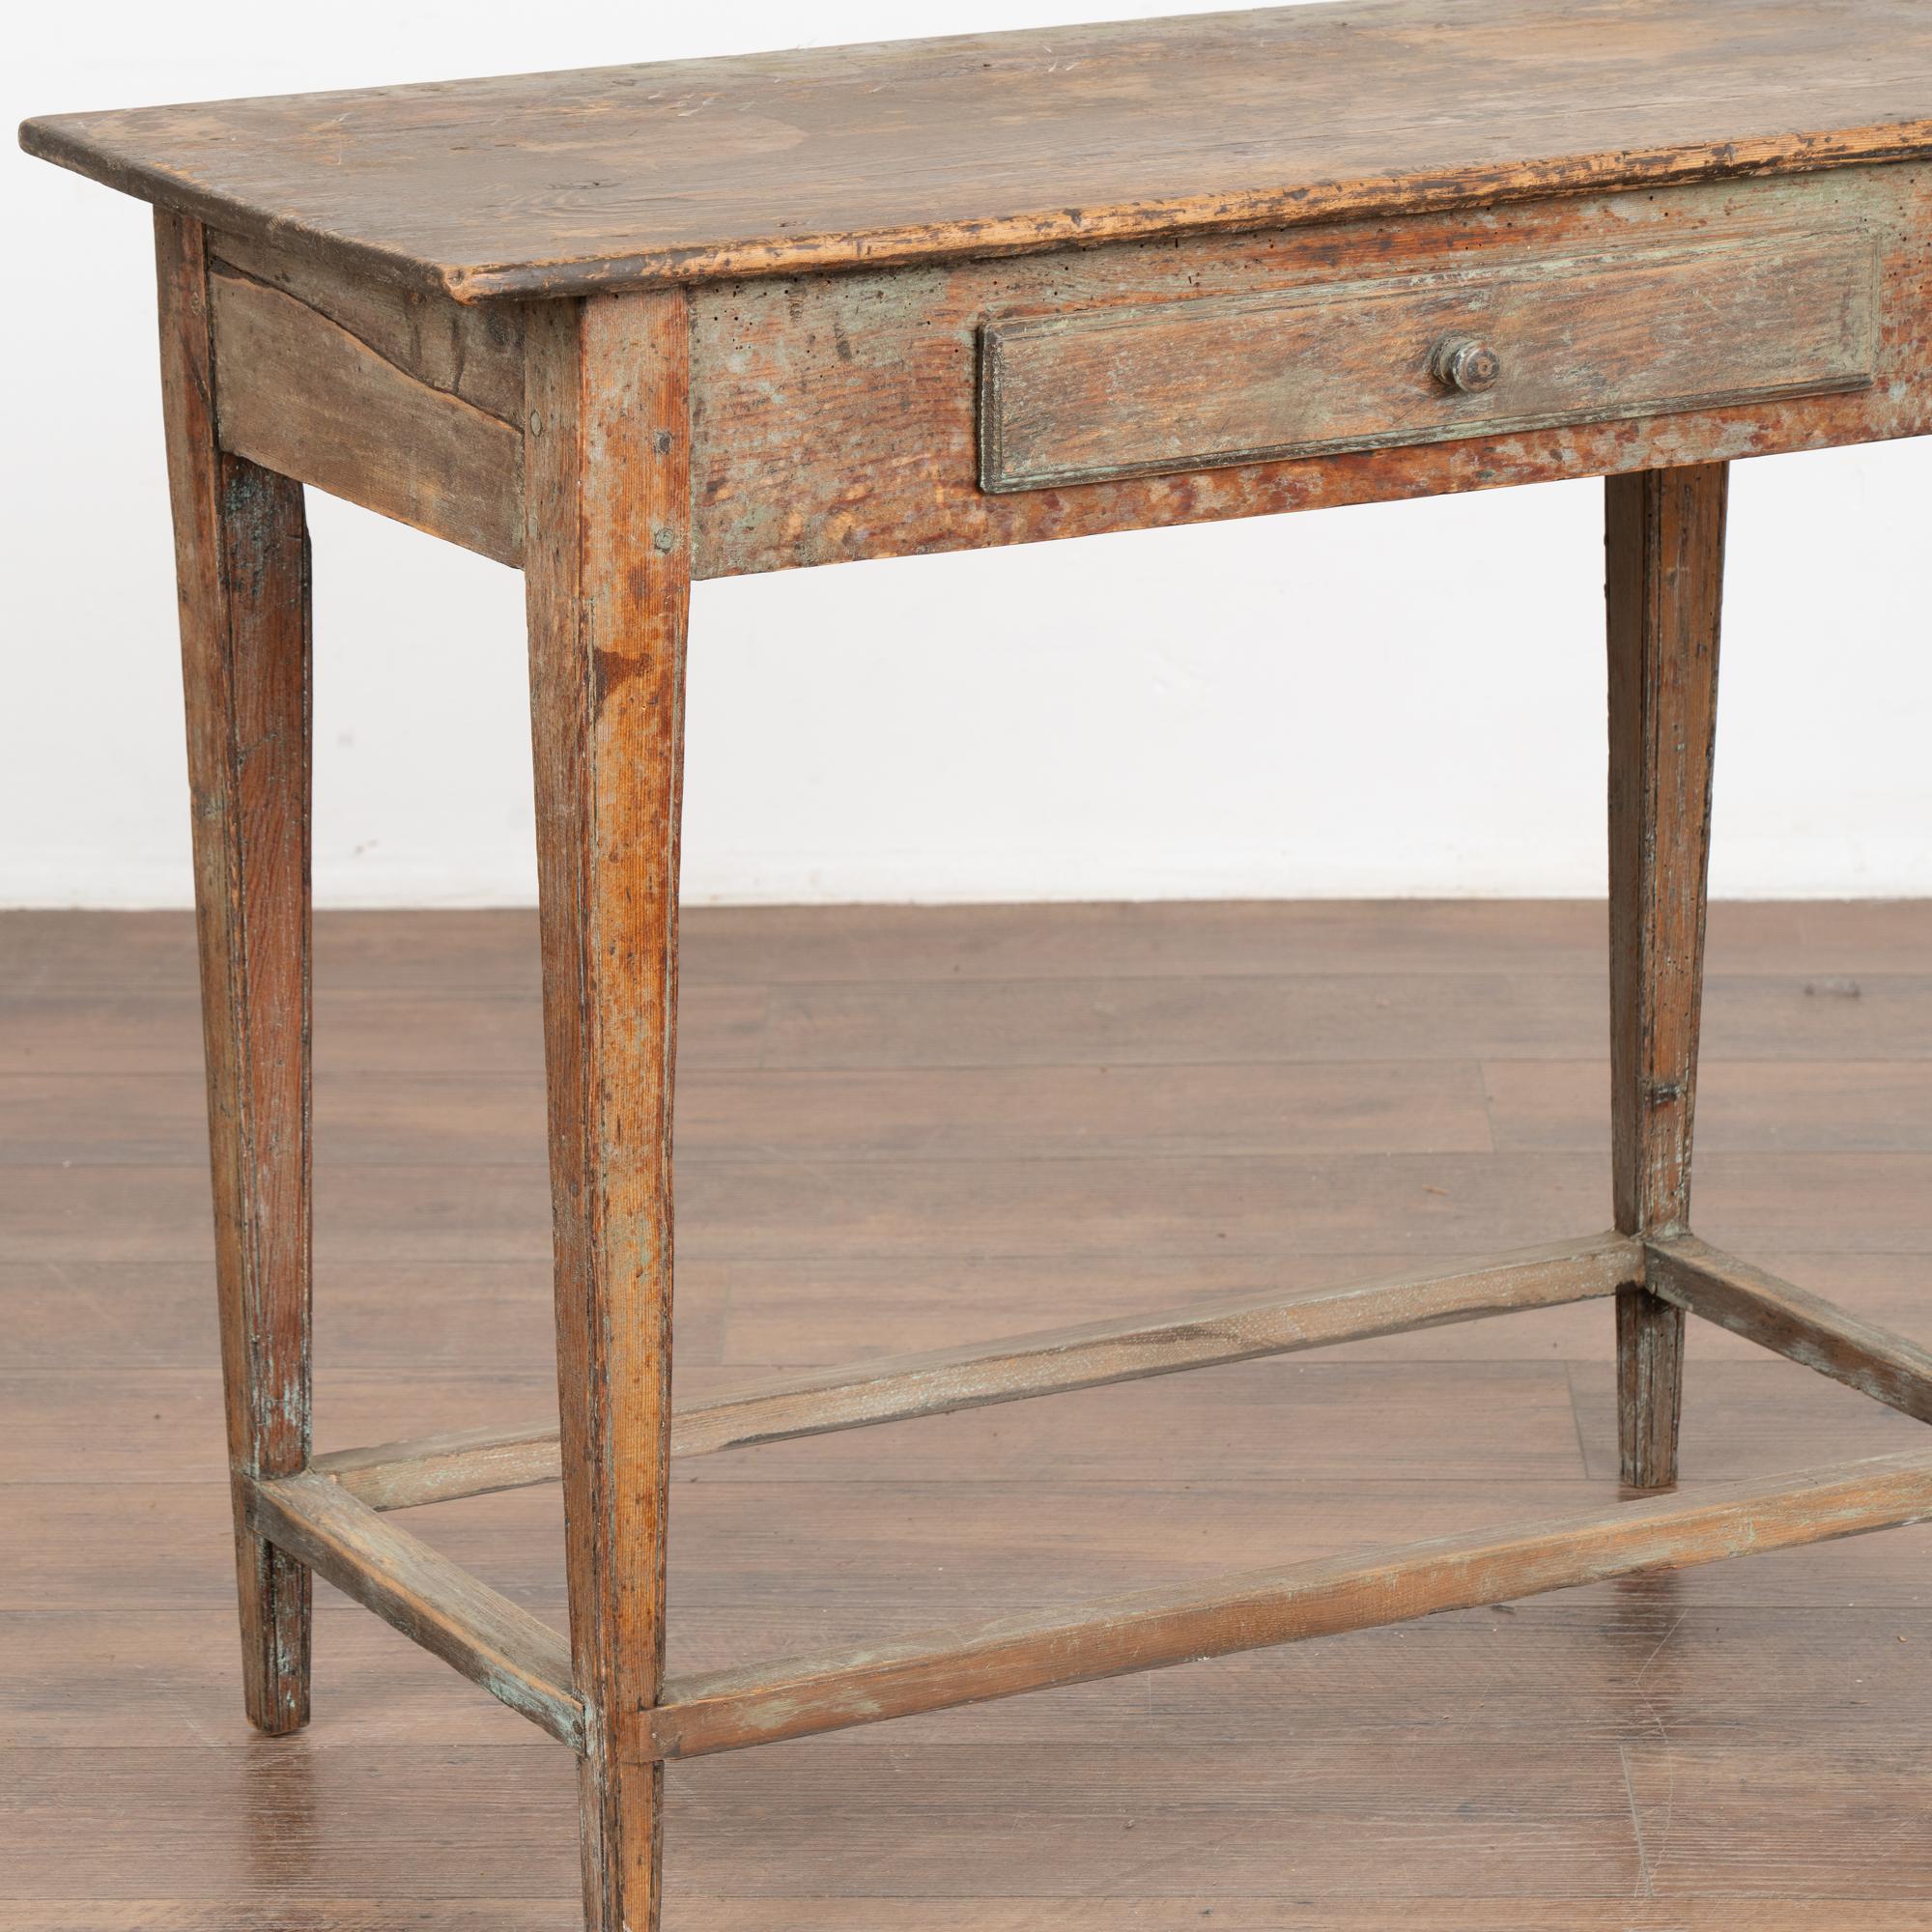 19th Century Original Painted Pine Side Table With Drawer, Sweden circa 1820-40